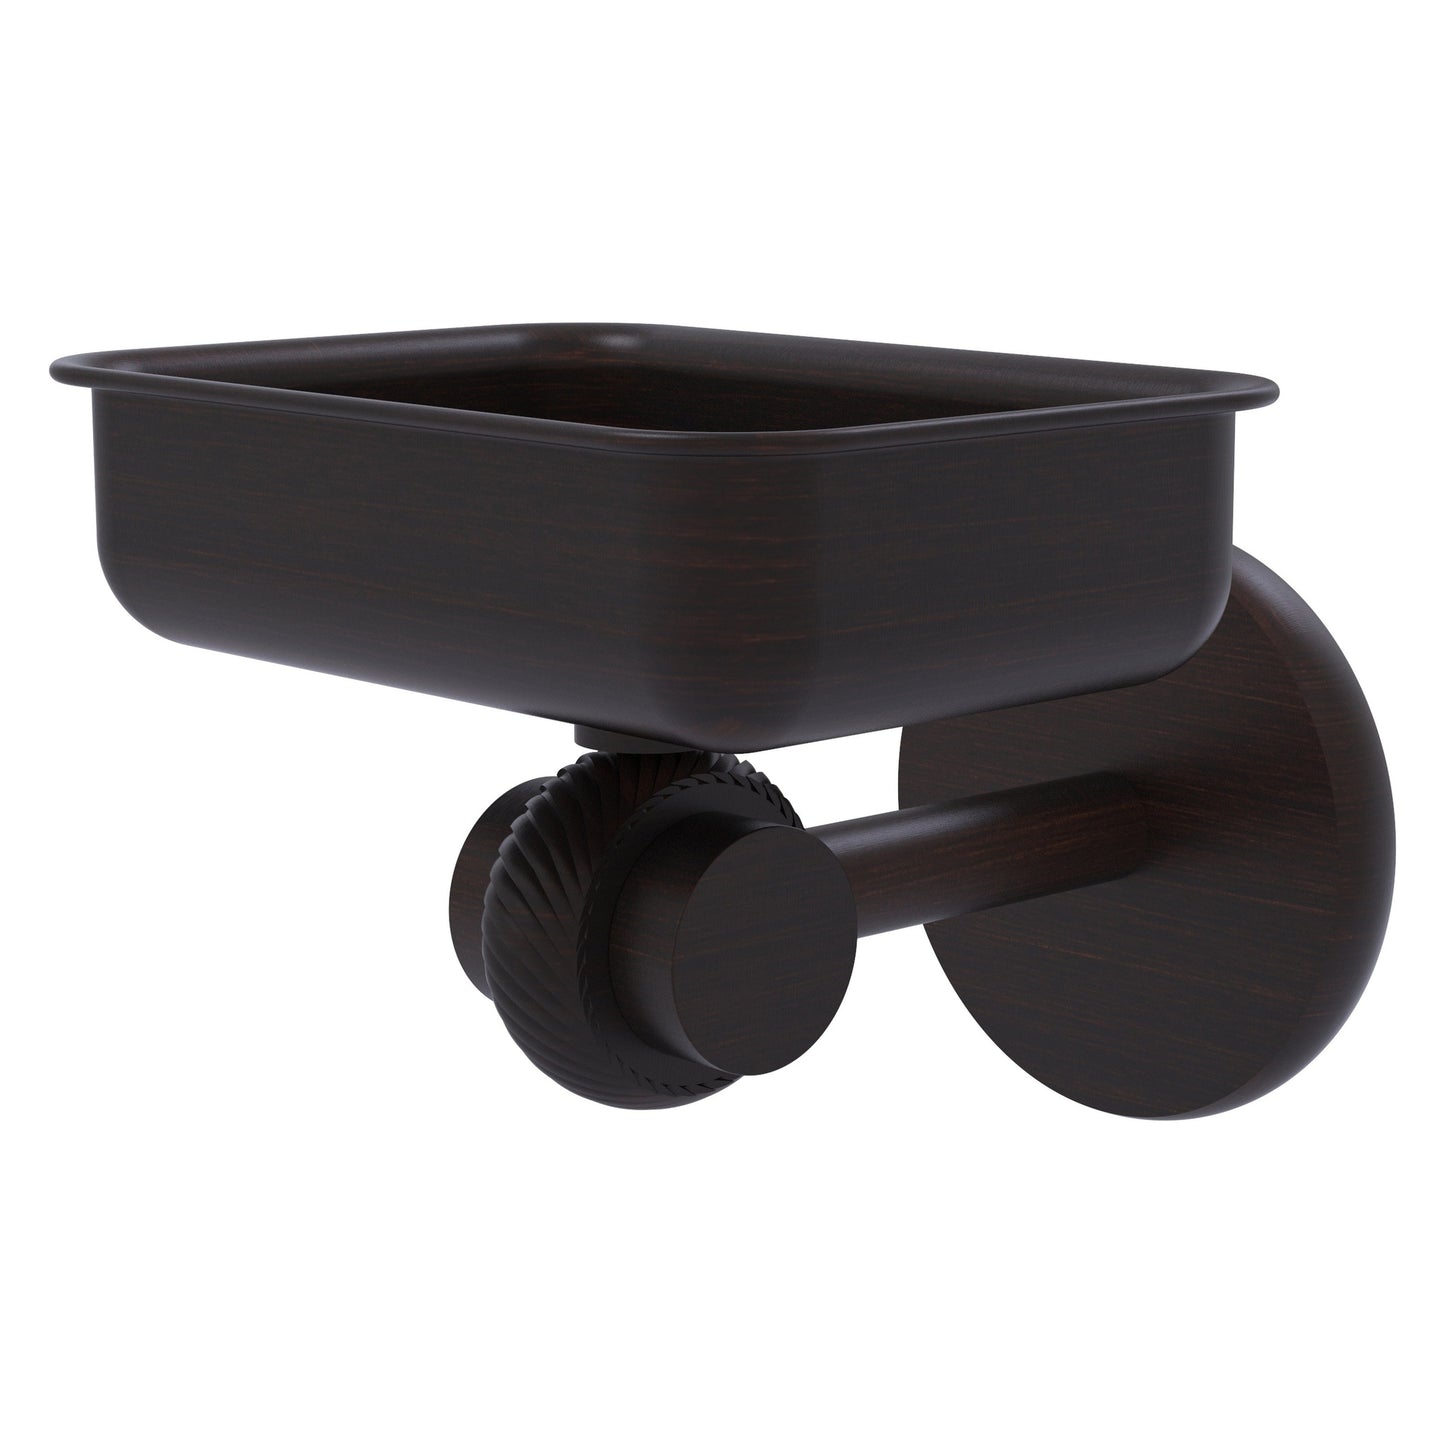 Allied Brass Satellite Orbit Two 4.5" x 3.5" Venetian Bronze Solid Brass Wall-Mounted Soap Dish With Twisted Accents